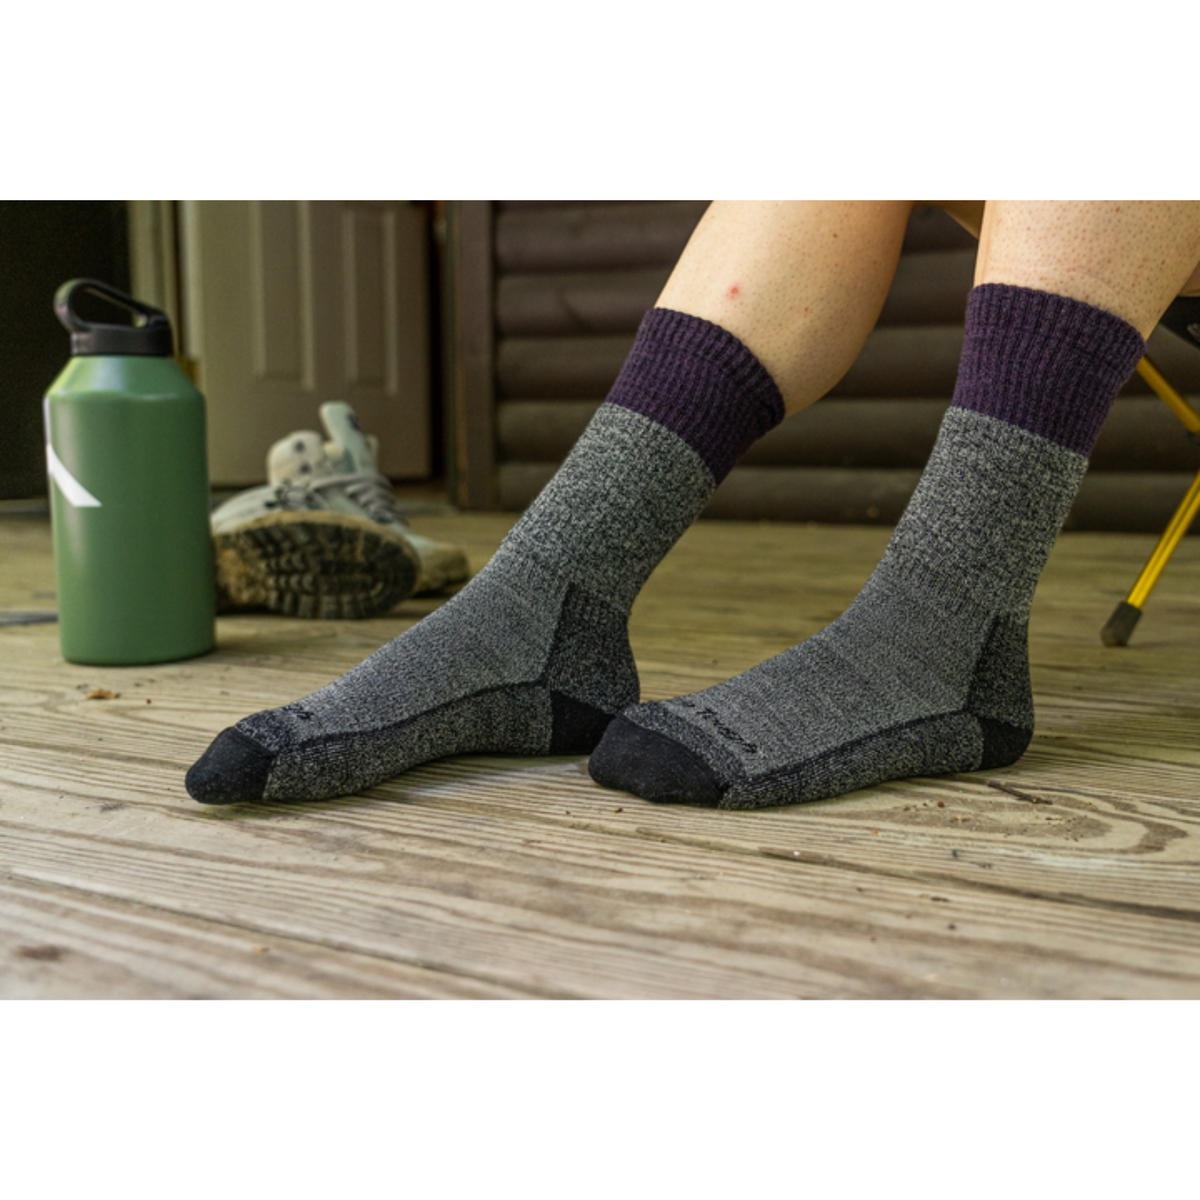 Darn Tough 1983 Scout Midweight Hiking Boot women&#39;s sock featuring grey sock with purple cuff worn by model